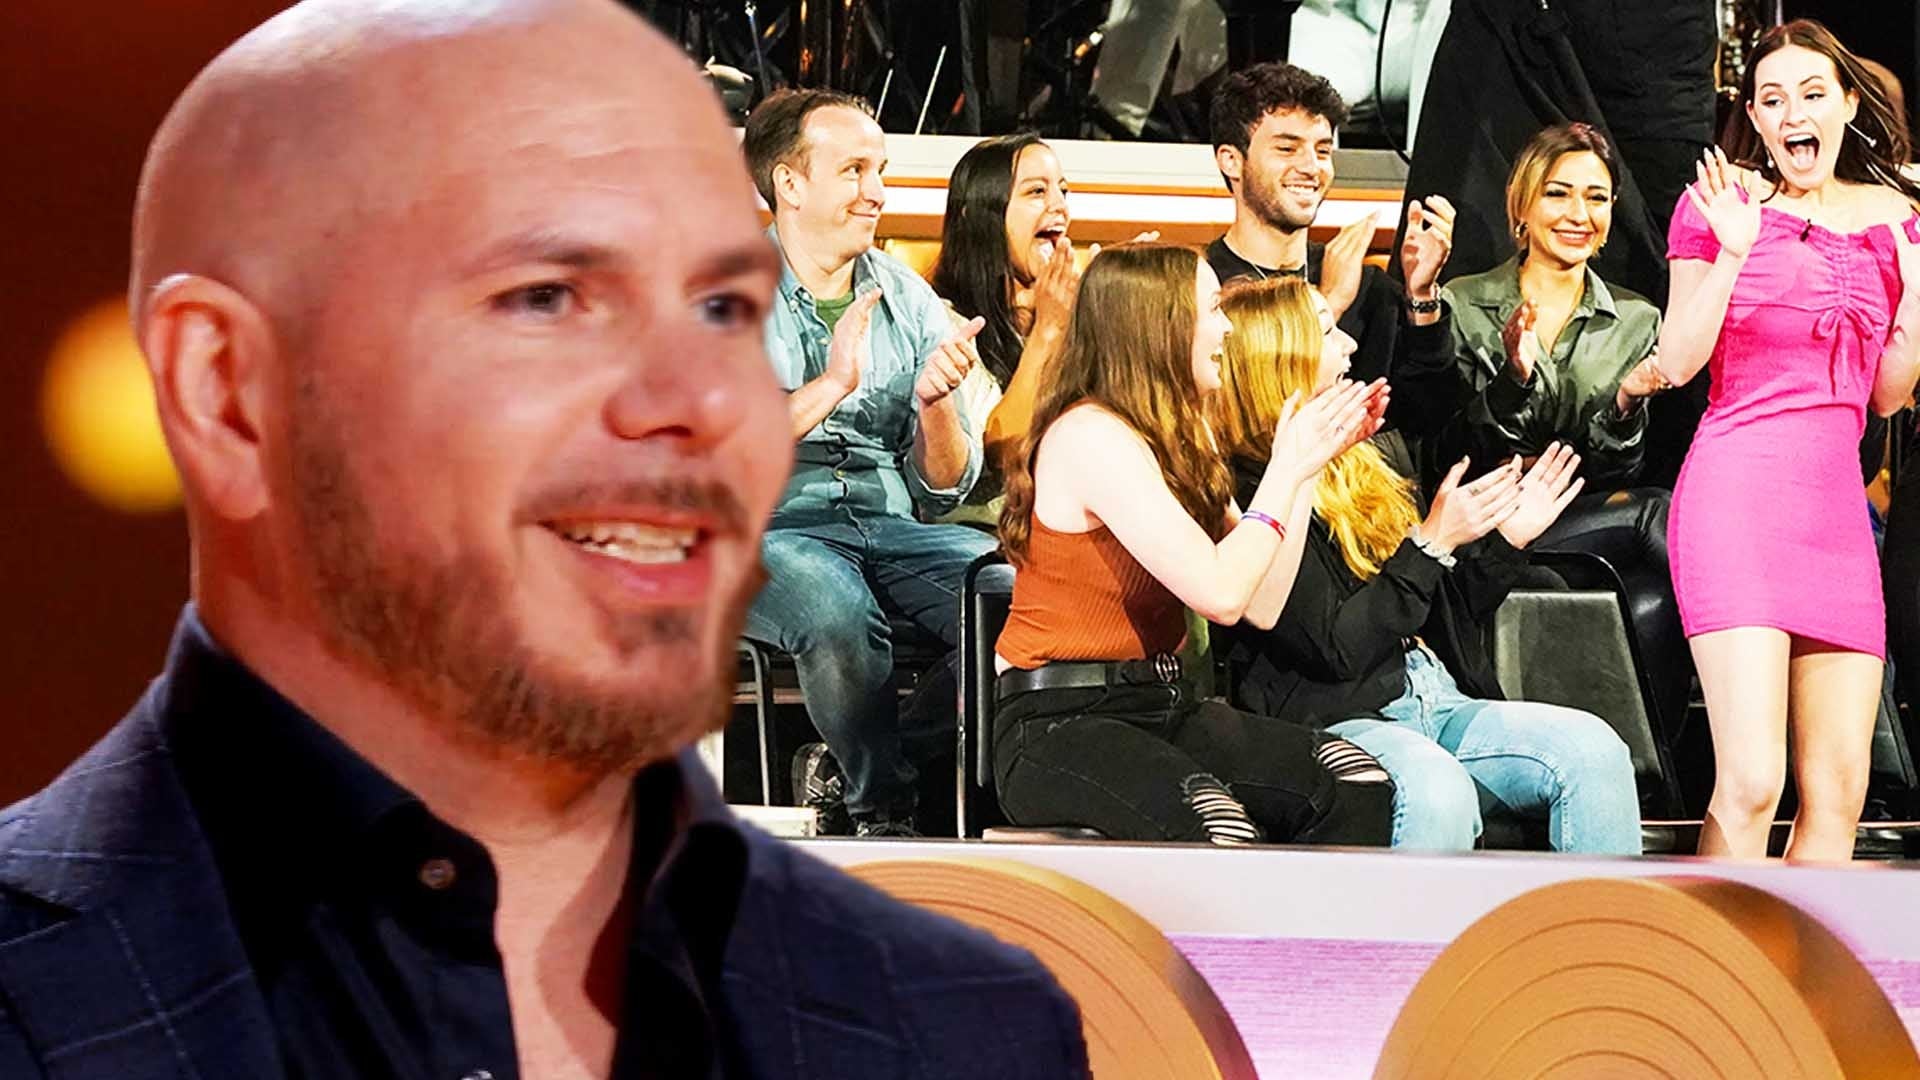 Watch Jimmy Fallon and Pitbull Play Giant Beer Pong - Eater